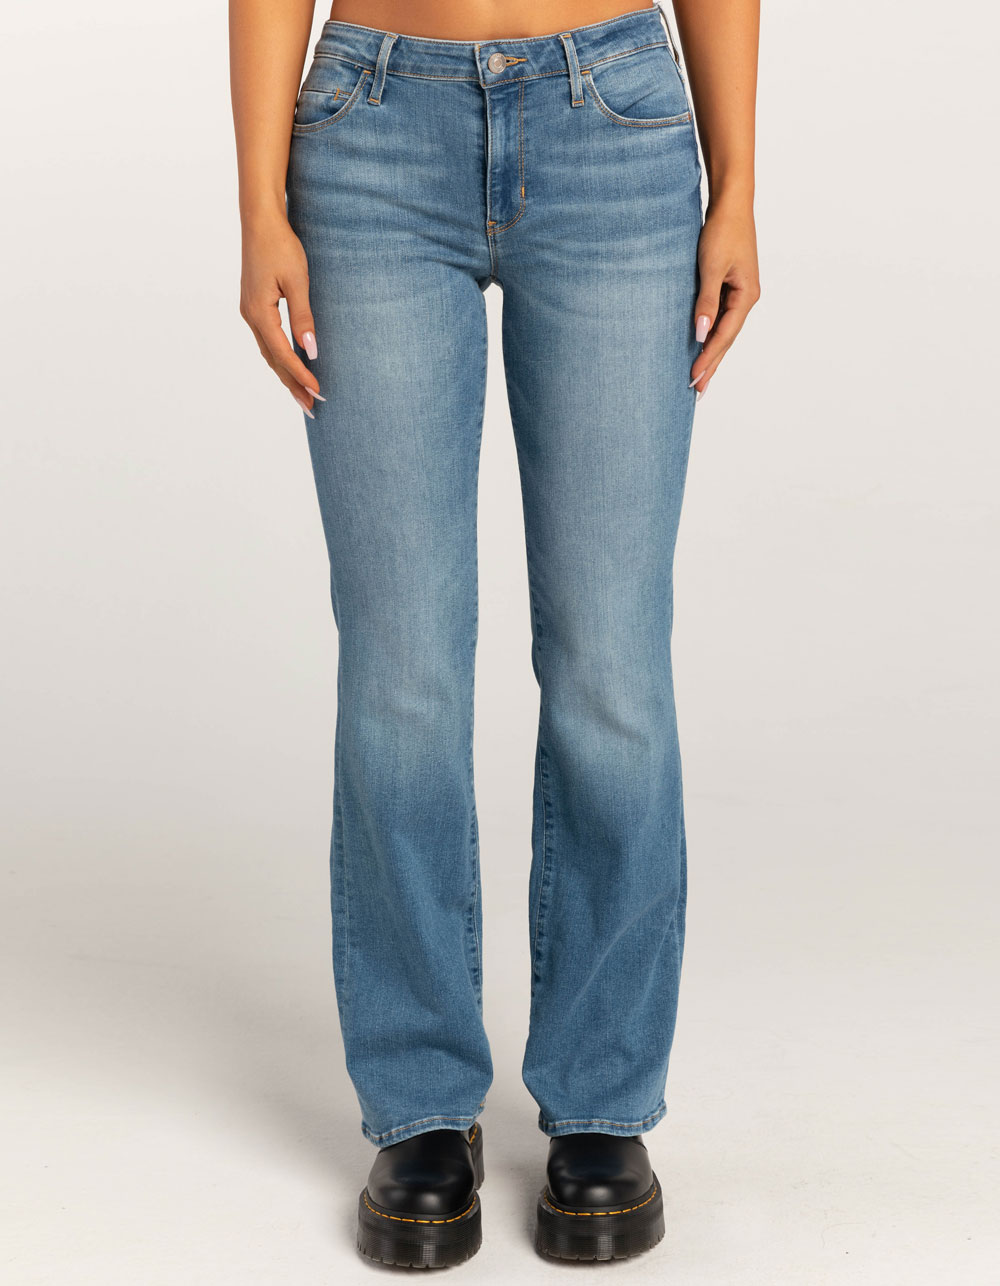 GUESS Sexy Bootcut Mid Rise Womens Jeans - MEDIUM WASH | Tillys